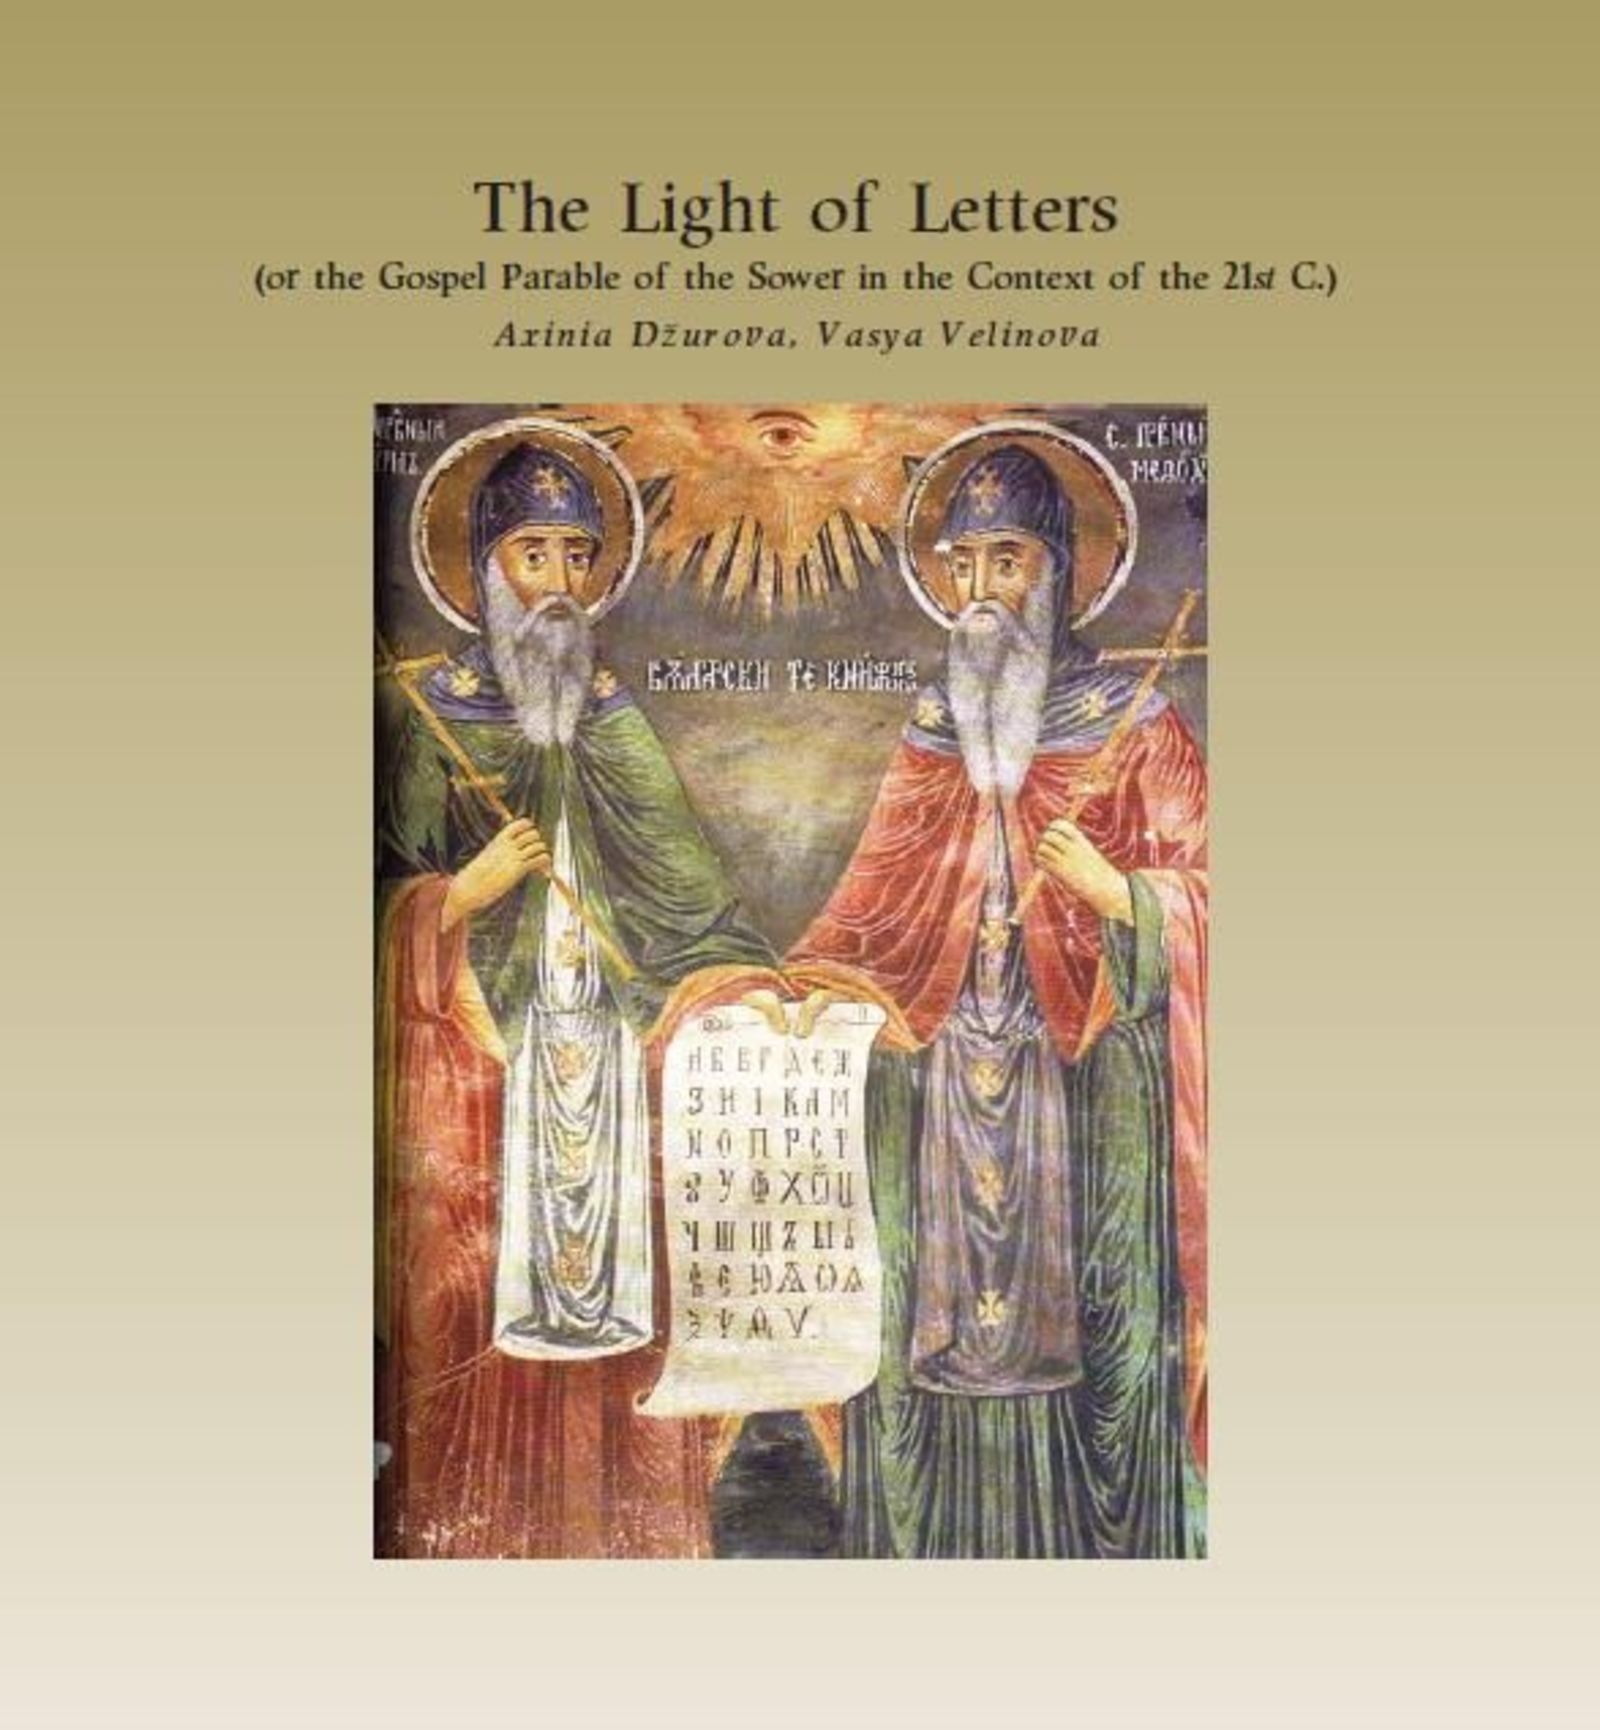 The exhibition "The Light of the Letters" in Cyprus